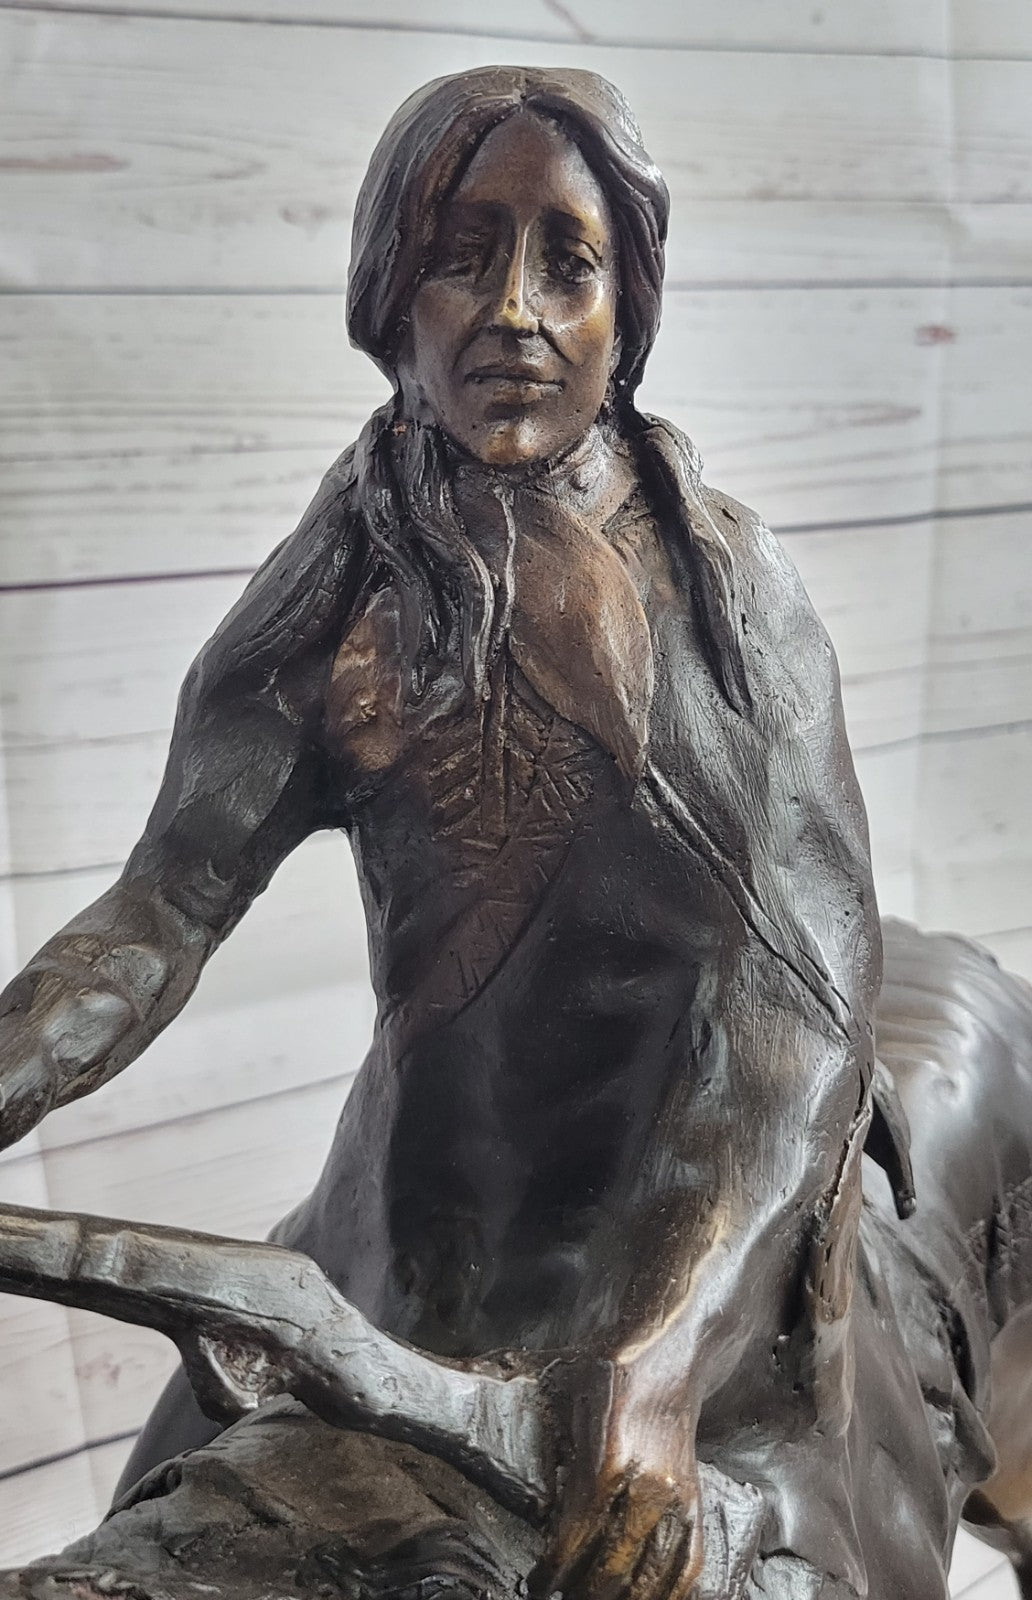 Bronze Casting Using The Lost Wax Process, "THE PEACE" by J.E. Fraser Sculpture